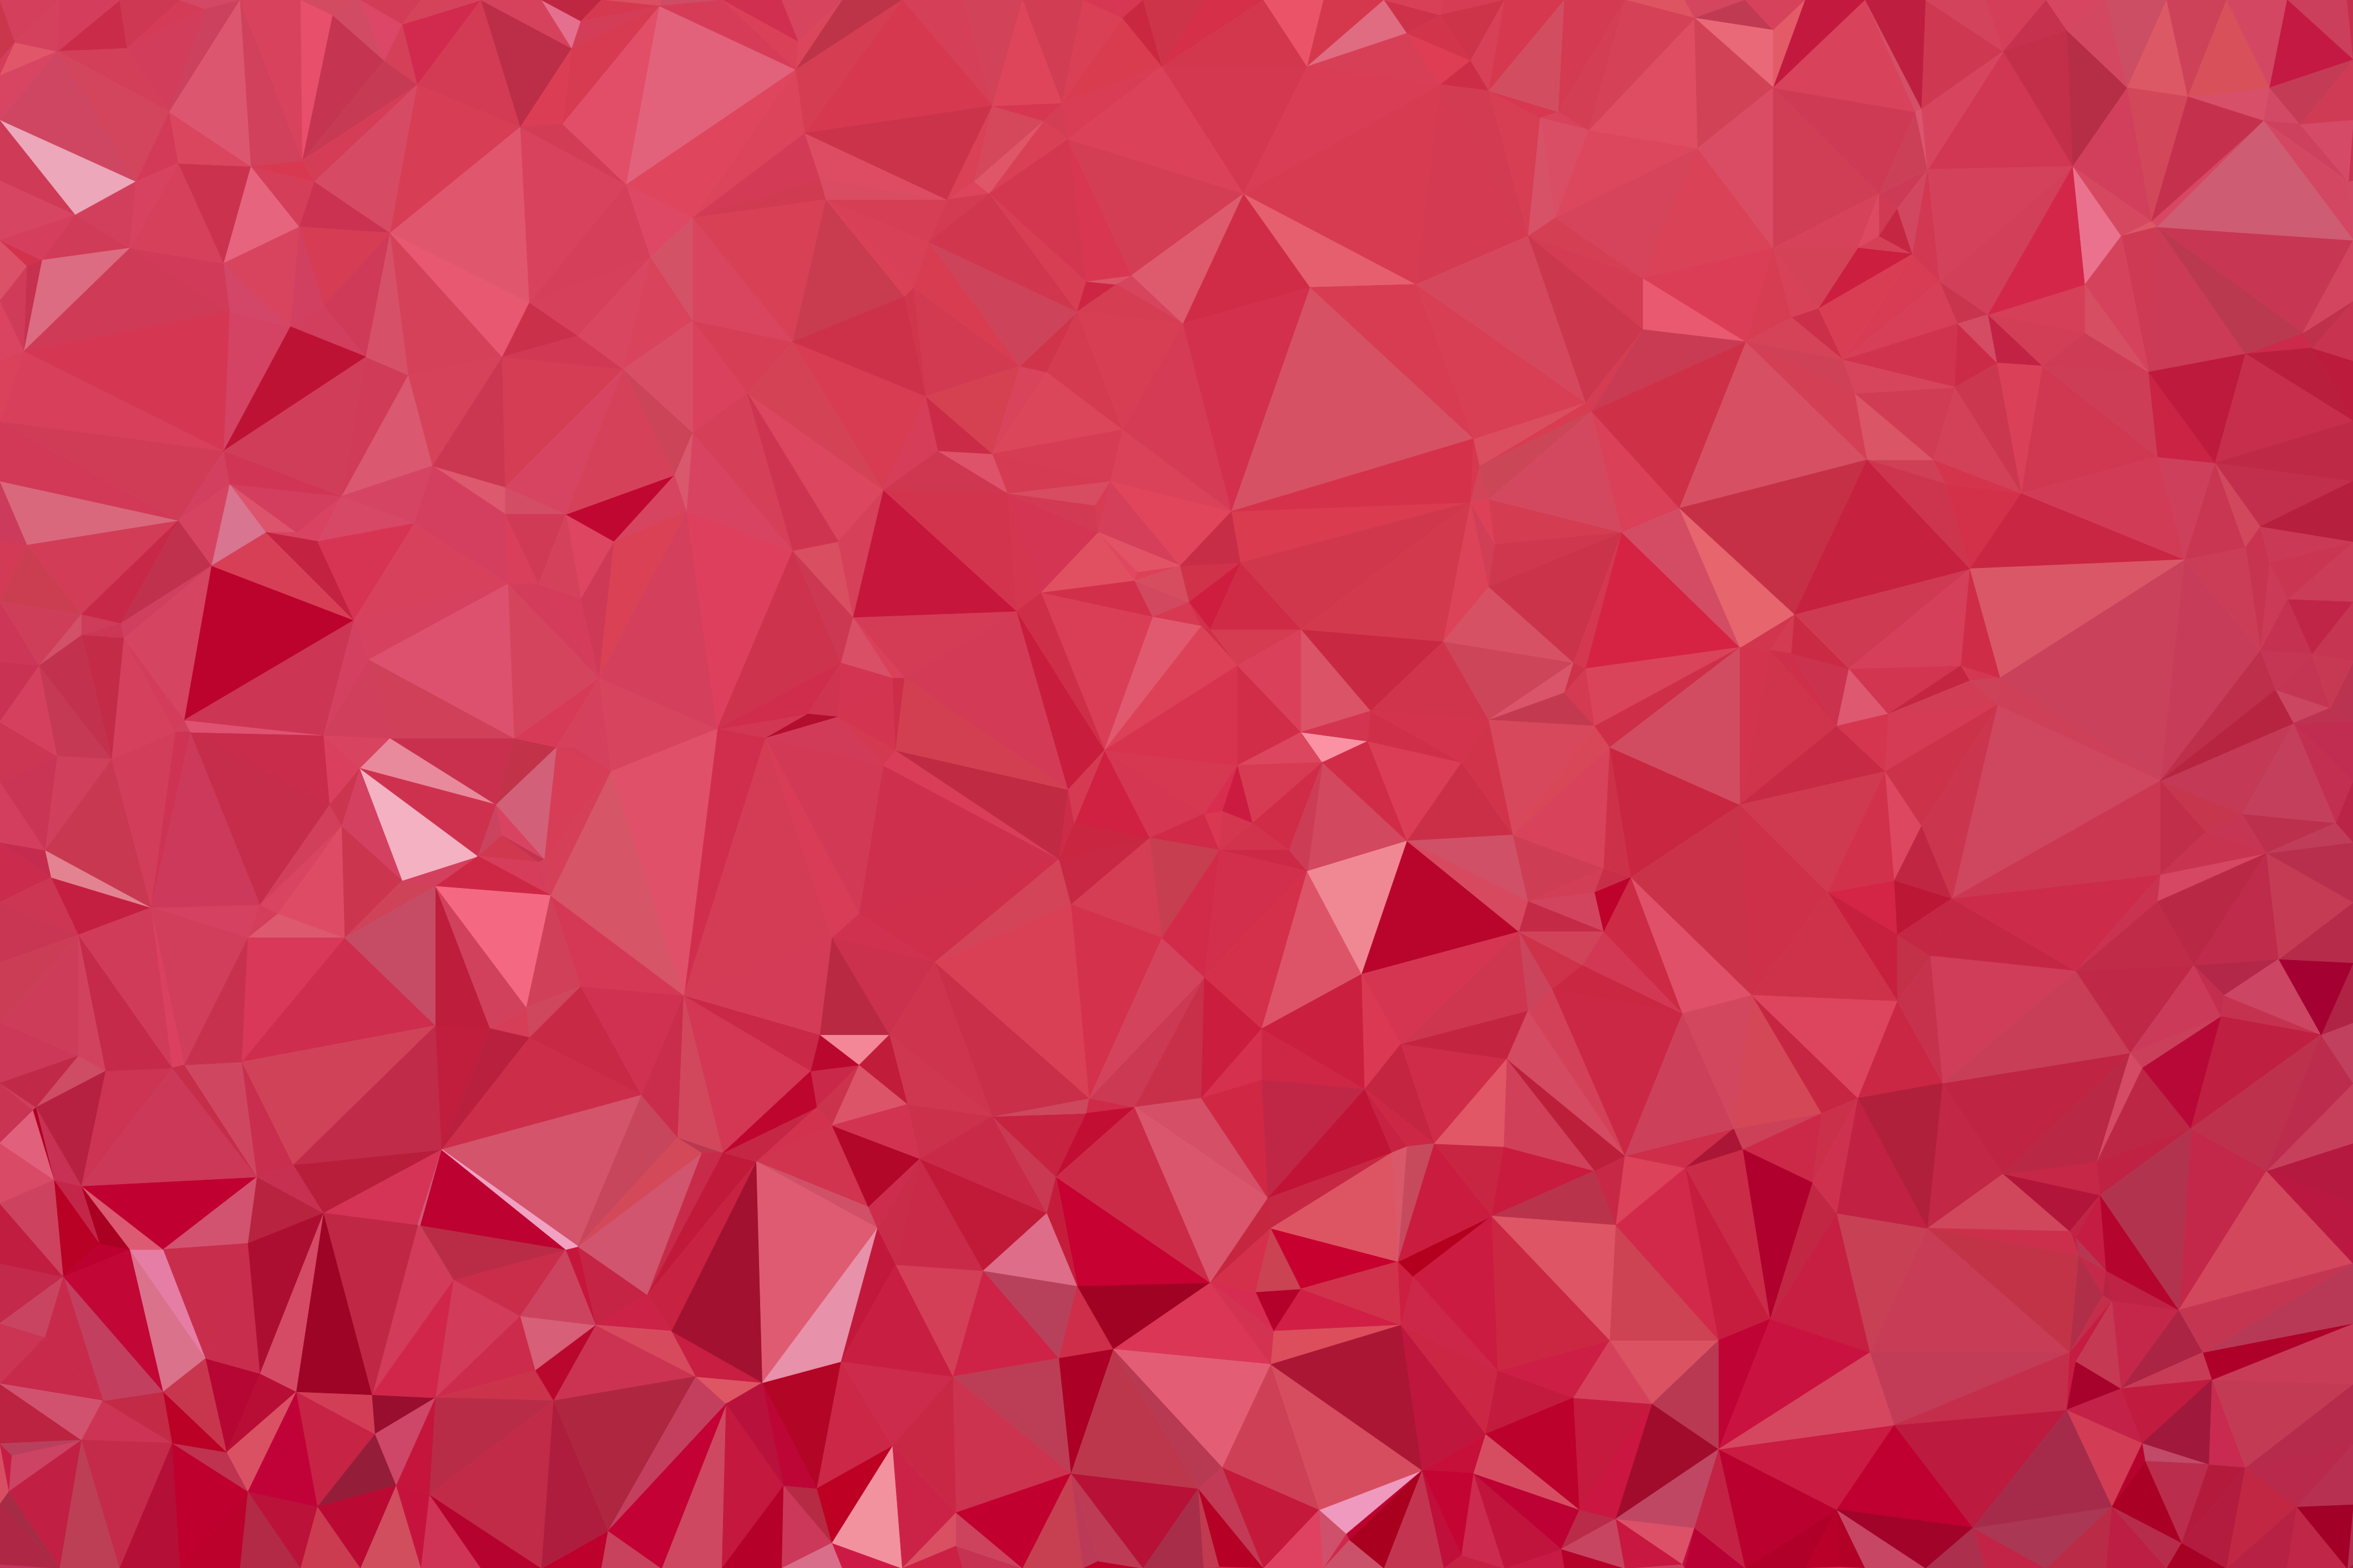 Download wallpaper 4241x2827 polygon, triangles, geometric, red HD background